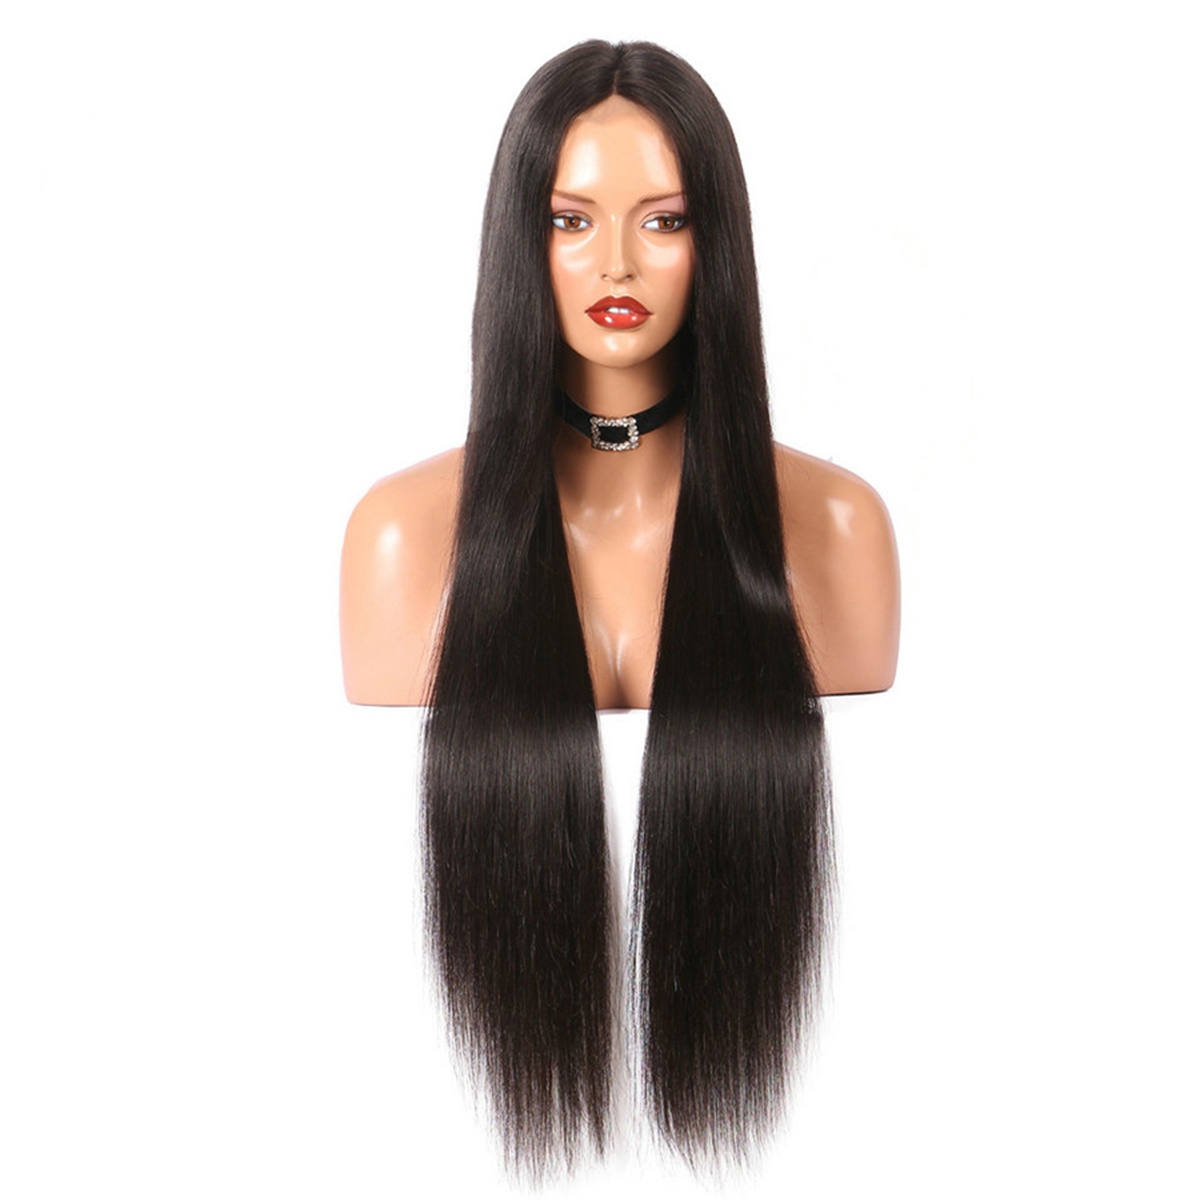 ISABEL Brazililian Virgin Silky Straight Full Lace Human Hair Wigs For Black Women ,130% Density Middle Part Human Hair Wigs